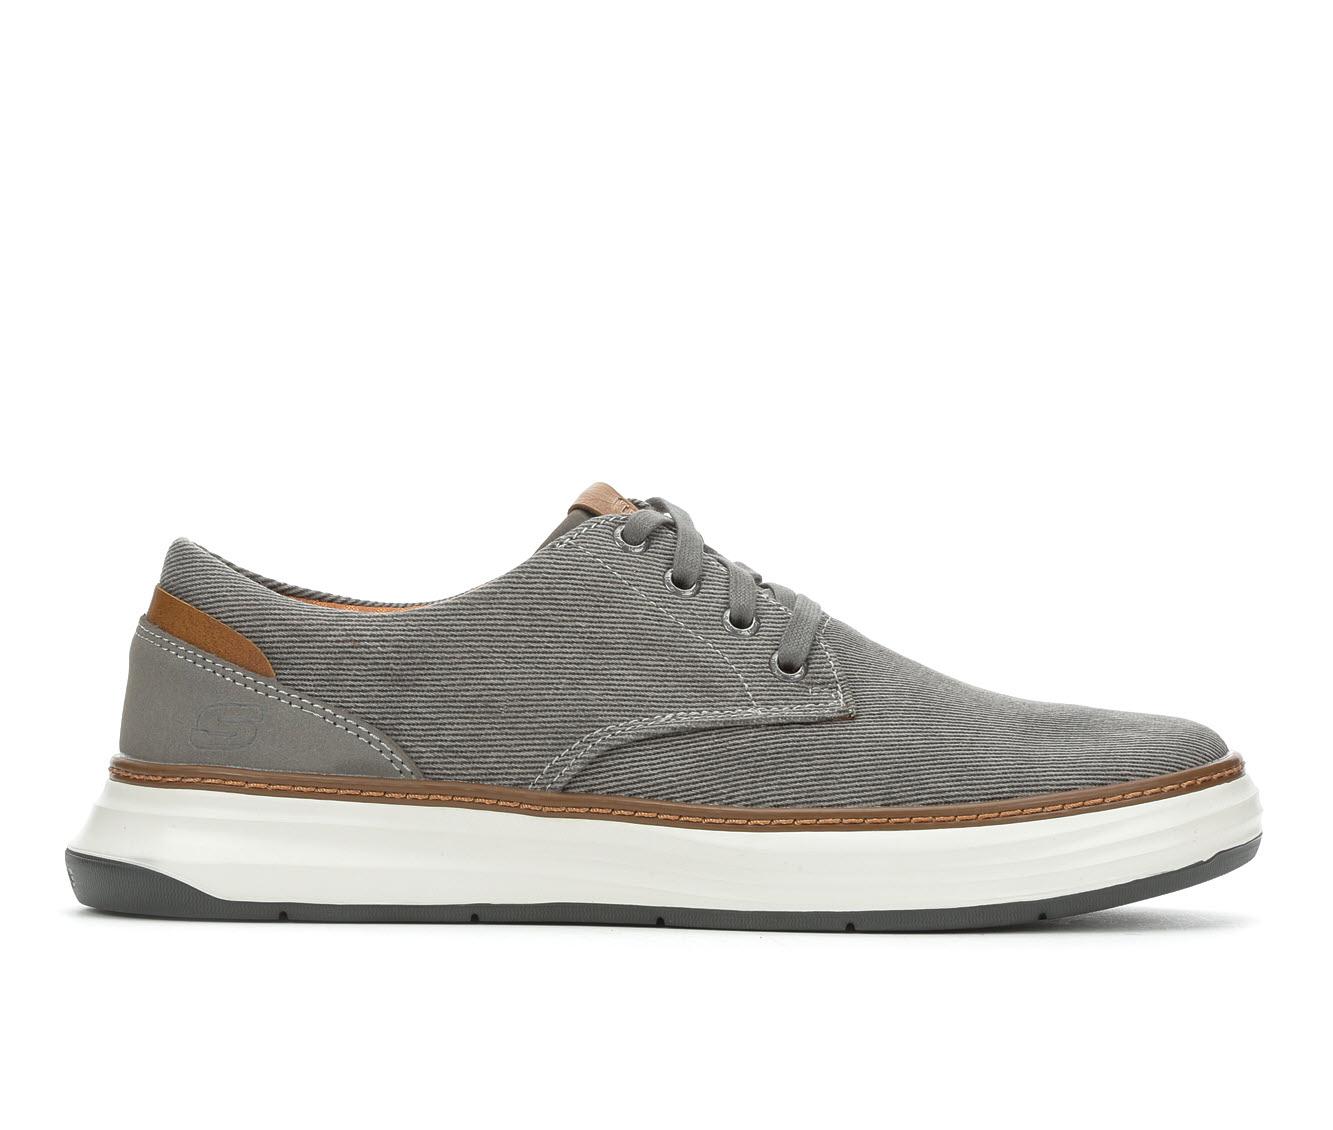 Skechers Canvas Ederson 65981 Shoe in Taupe (Gray) for Men - Lyst